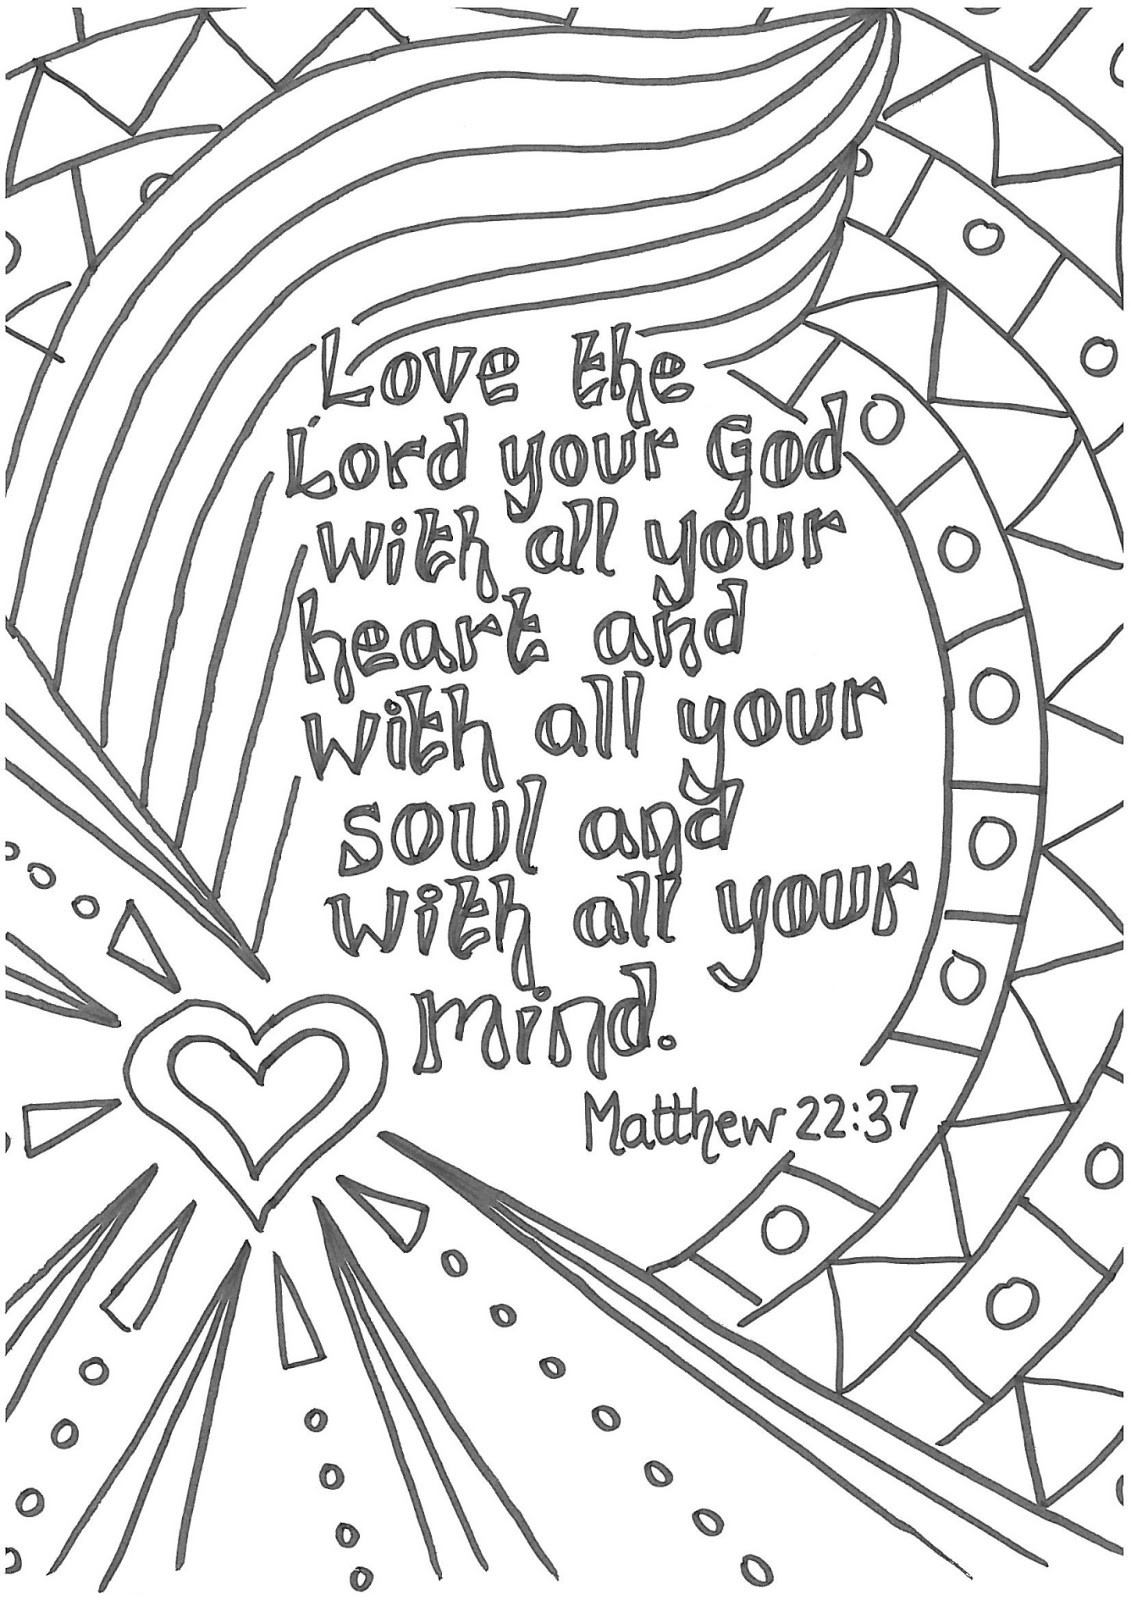 Prayer Coloring Pages For Adults
 Flame Creative Children s Ministry Prayers to colour in